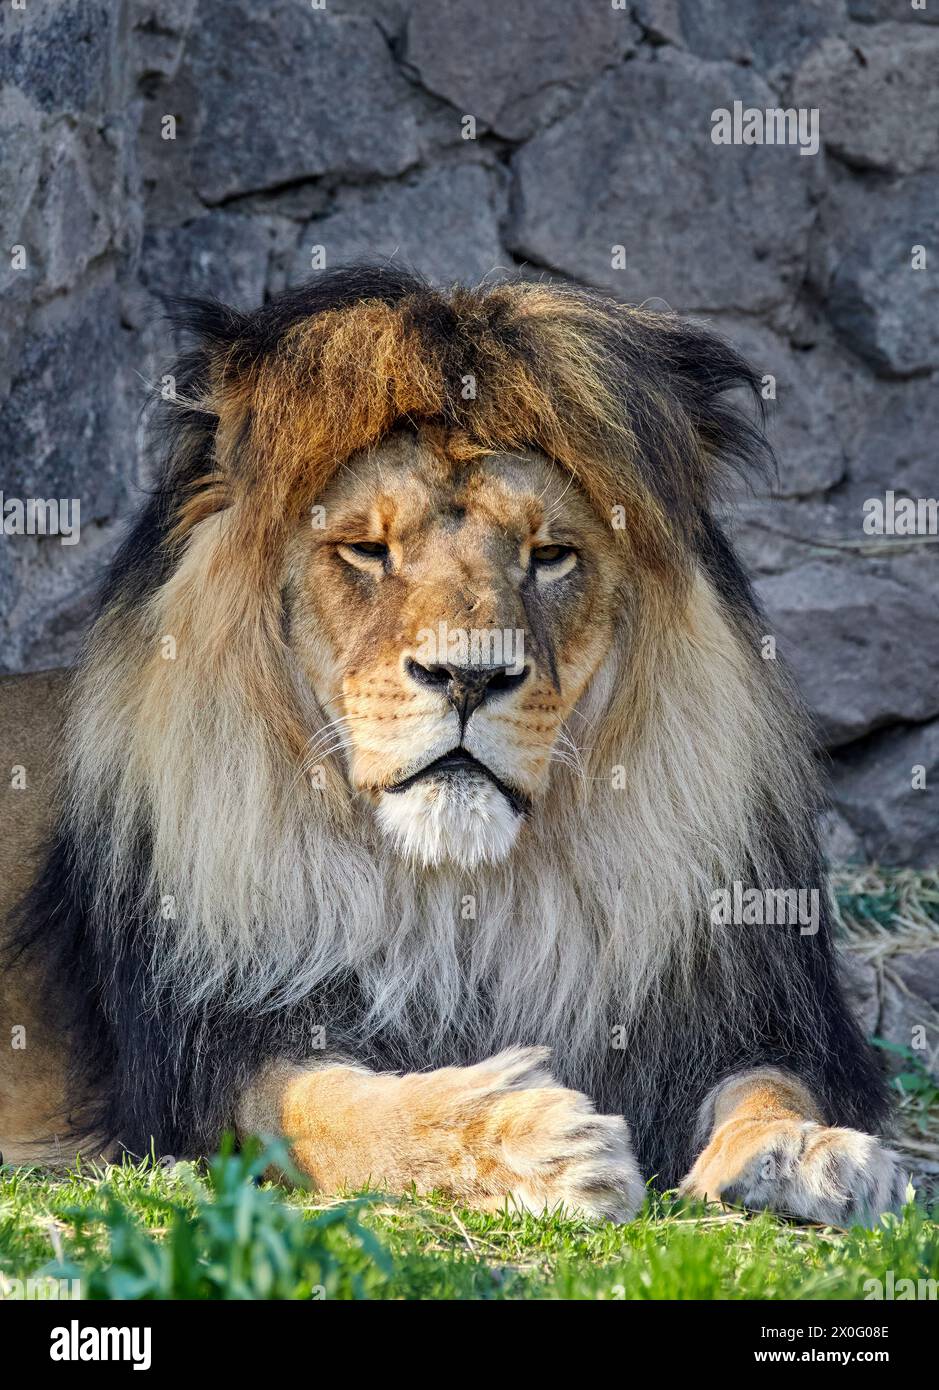 Image portrait of an adult lion with a lush mane in a zoo Stock Photo